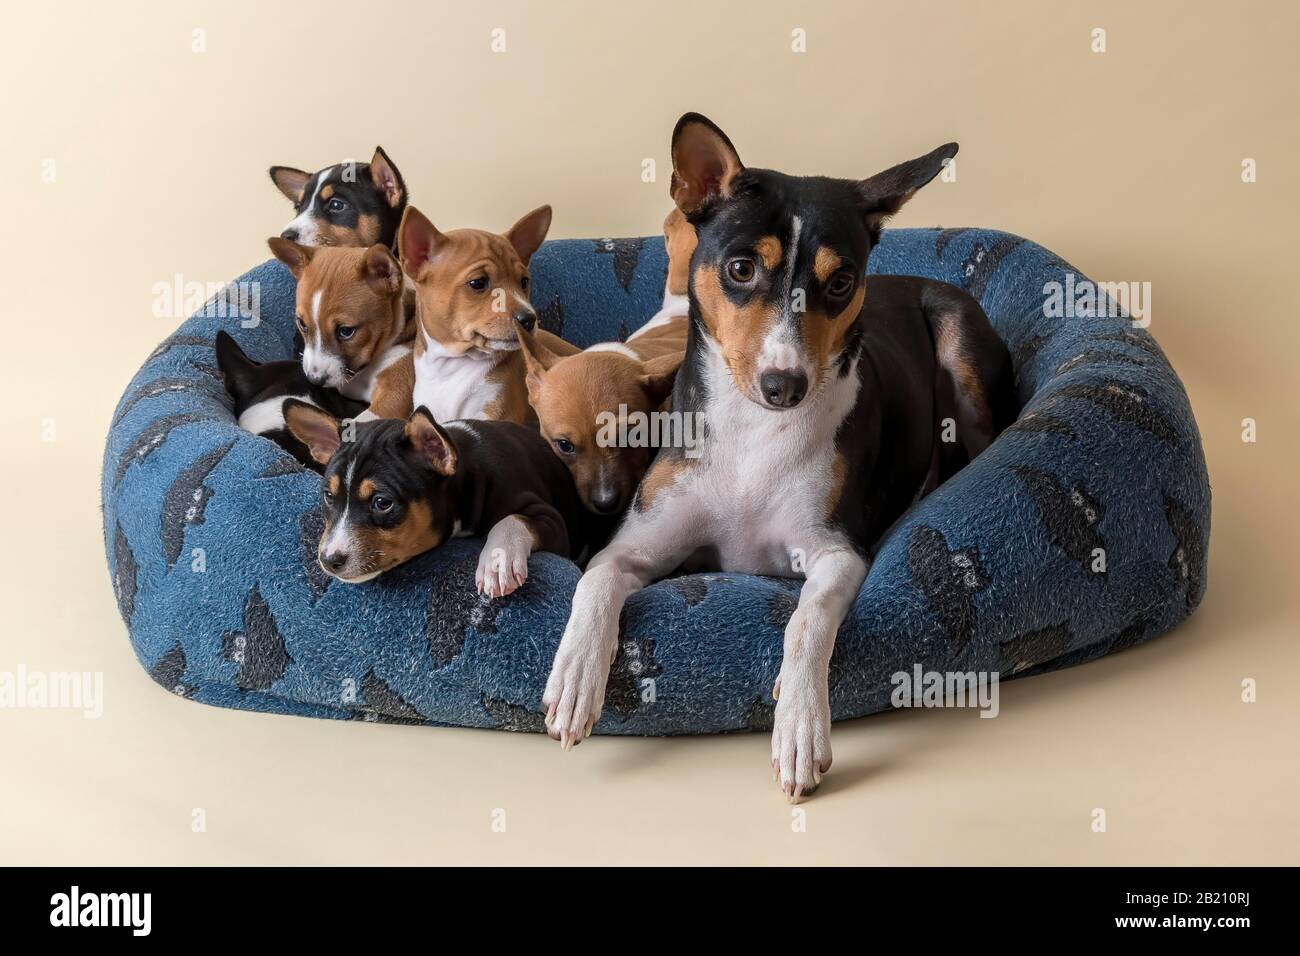 Basenji or Congo Terrier (Canis lupus familiaris), adult animal with puppies, lying in dog bed, studio shot, light background, Austria Stock Photo